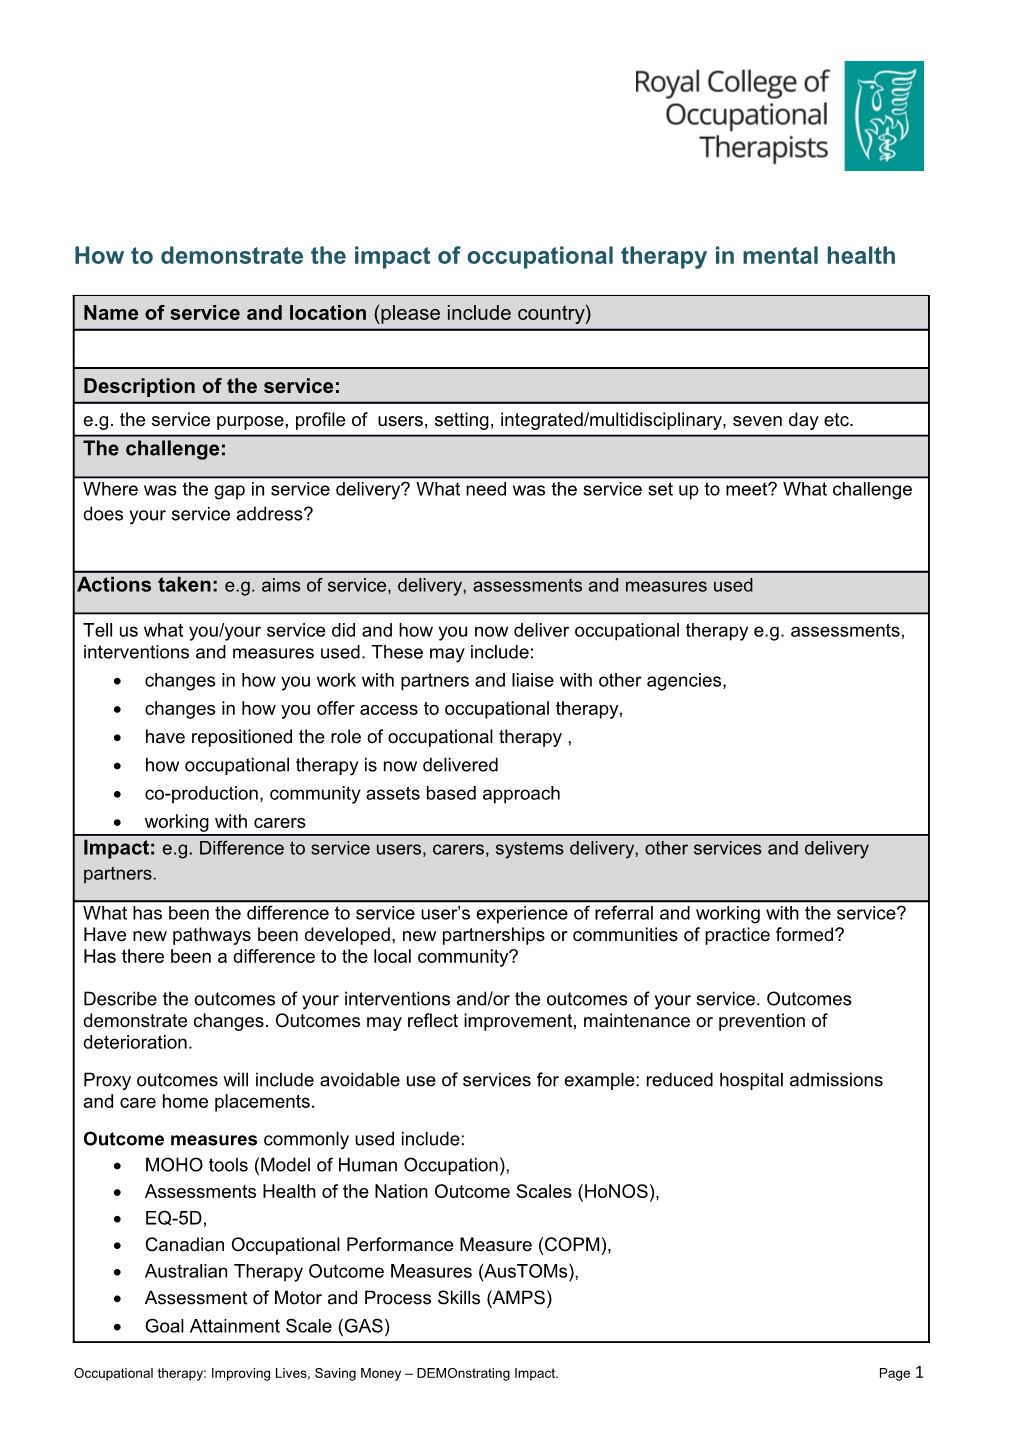 How to Demonstrate the Impact of Occupational Therapy in Mental Health